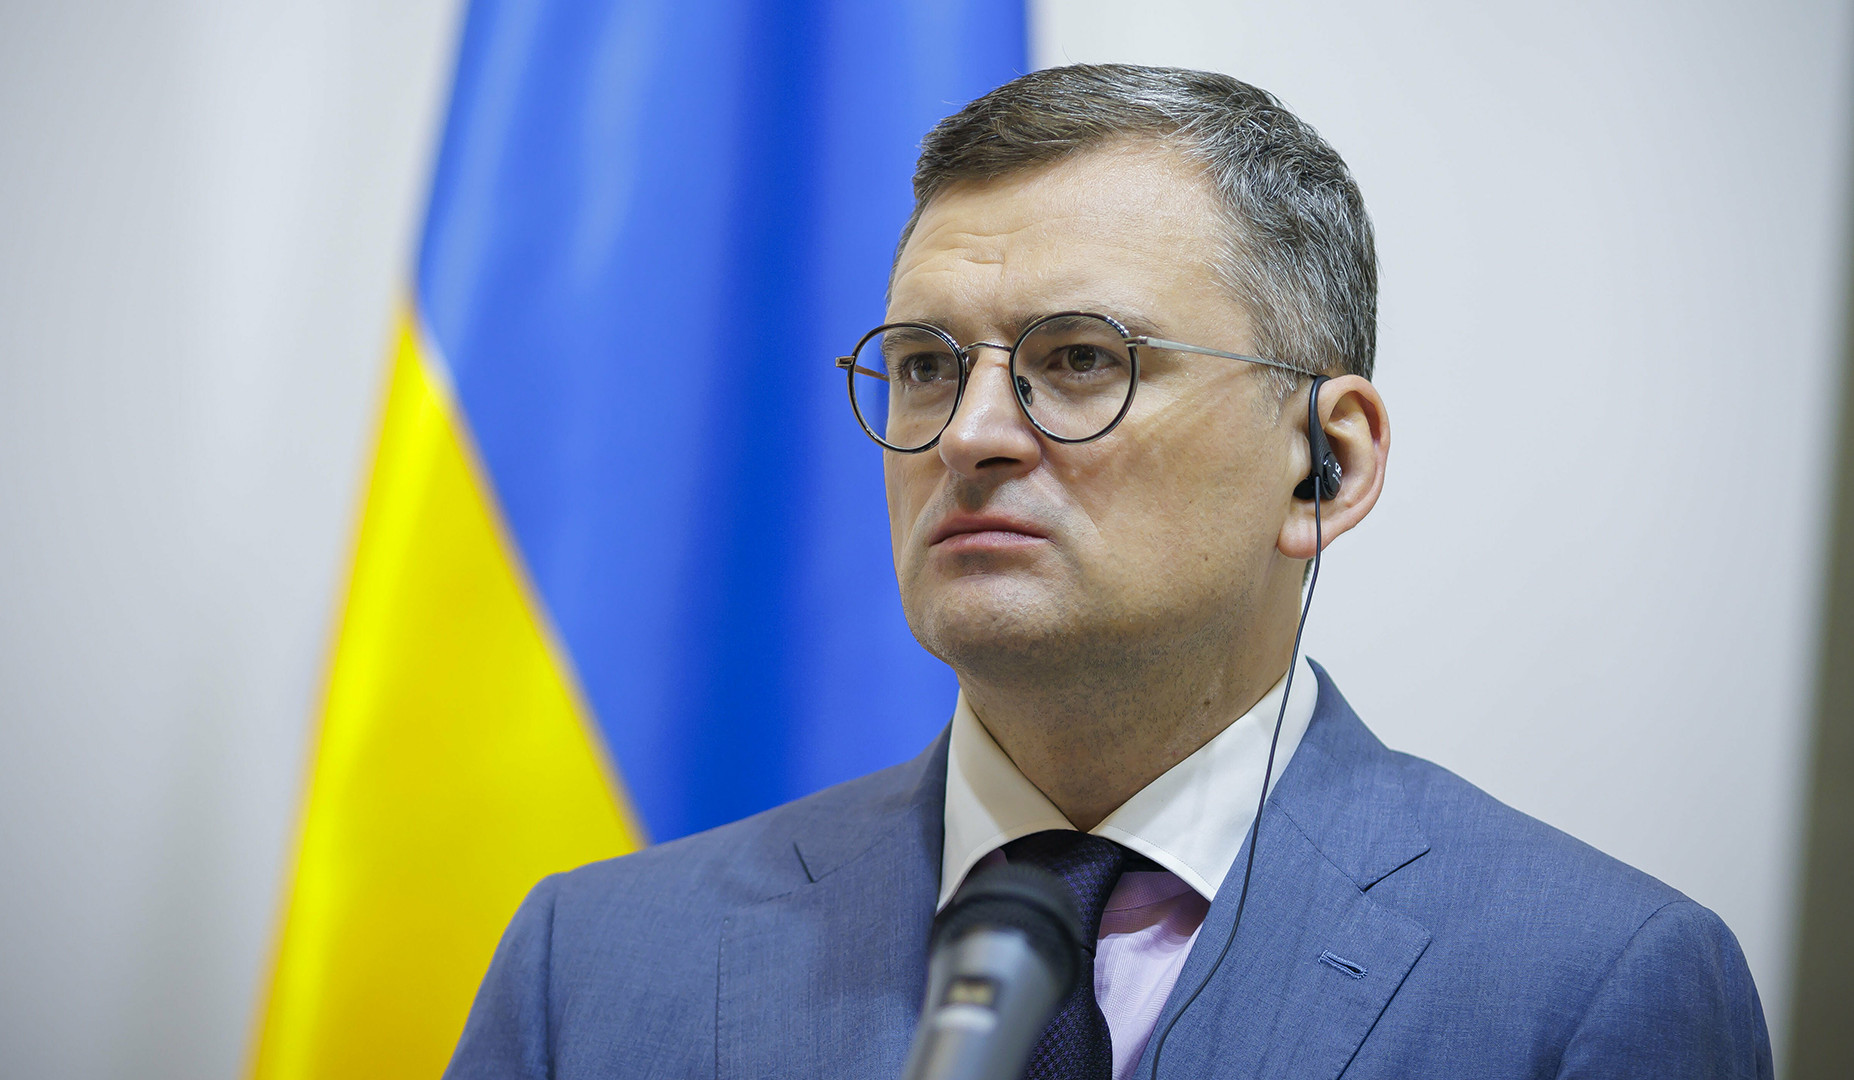 Ukraine's foreign minister arrives in China to talk peace